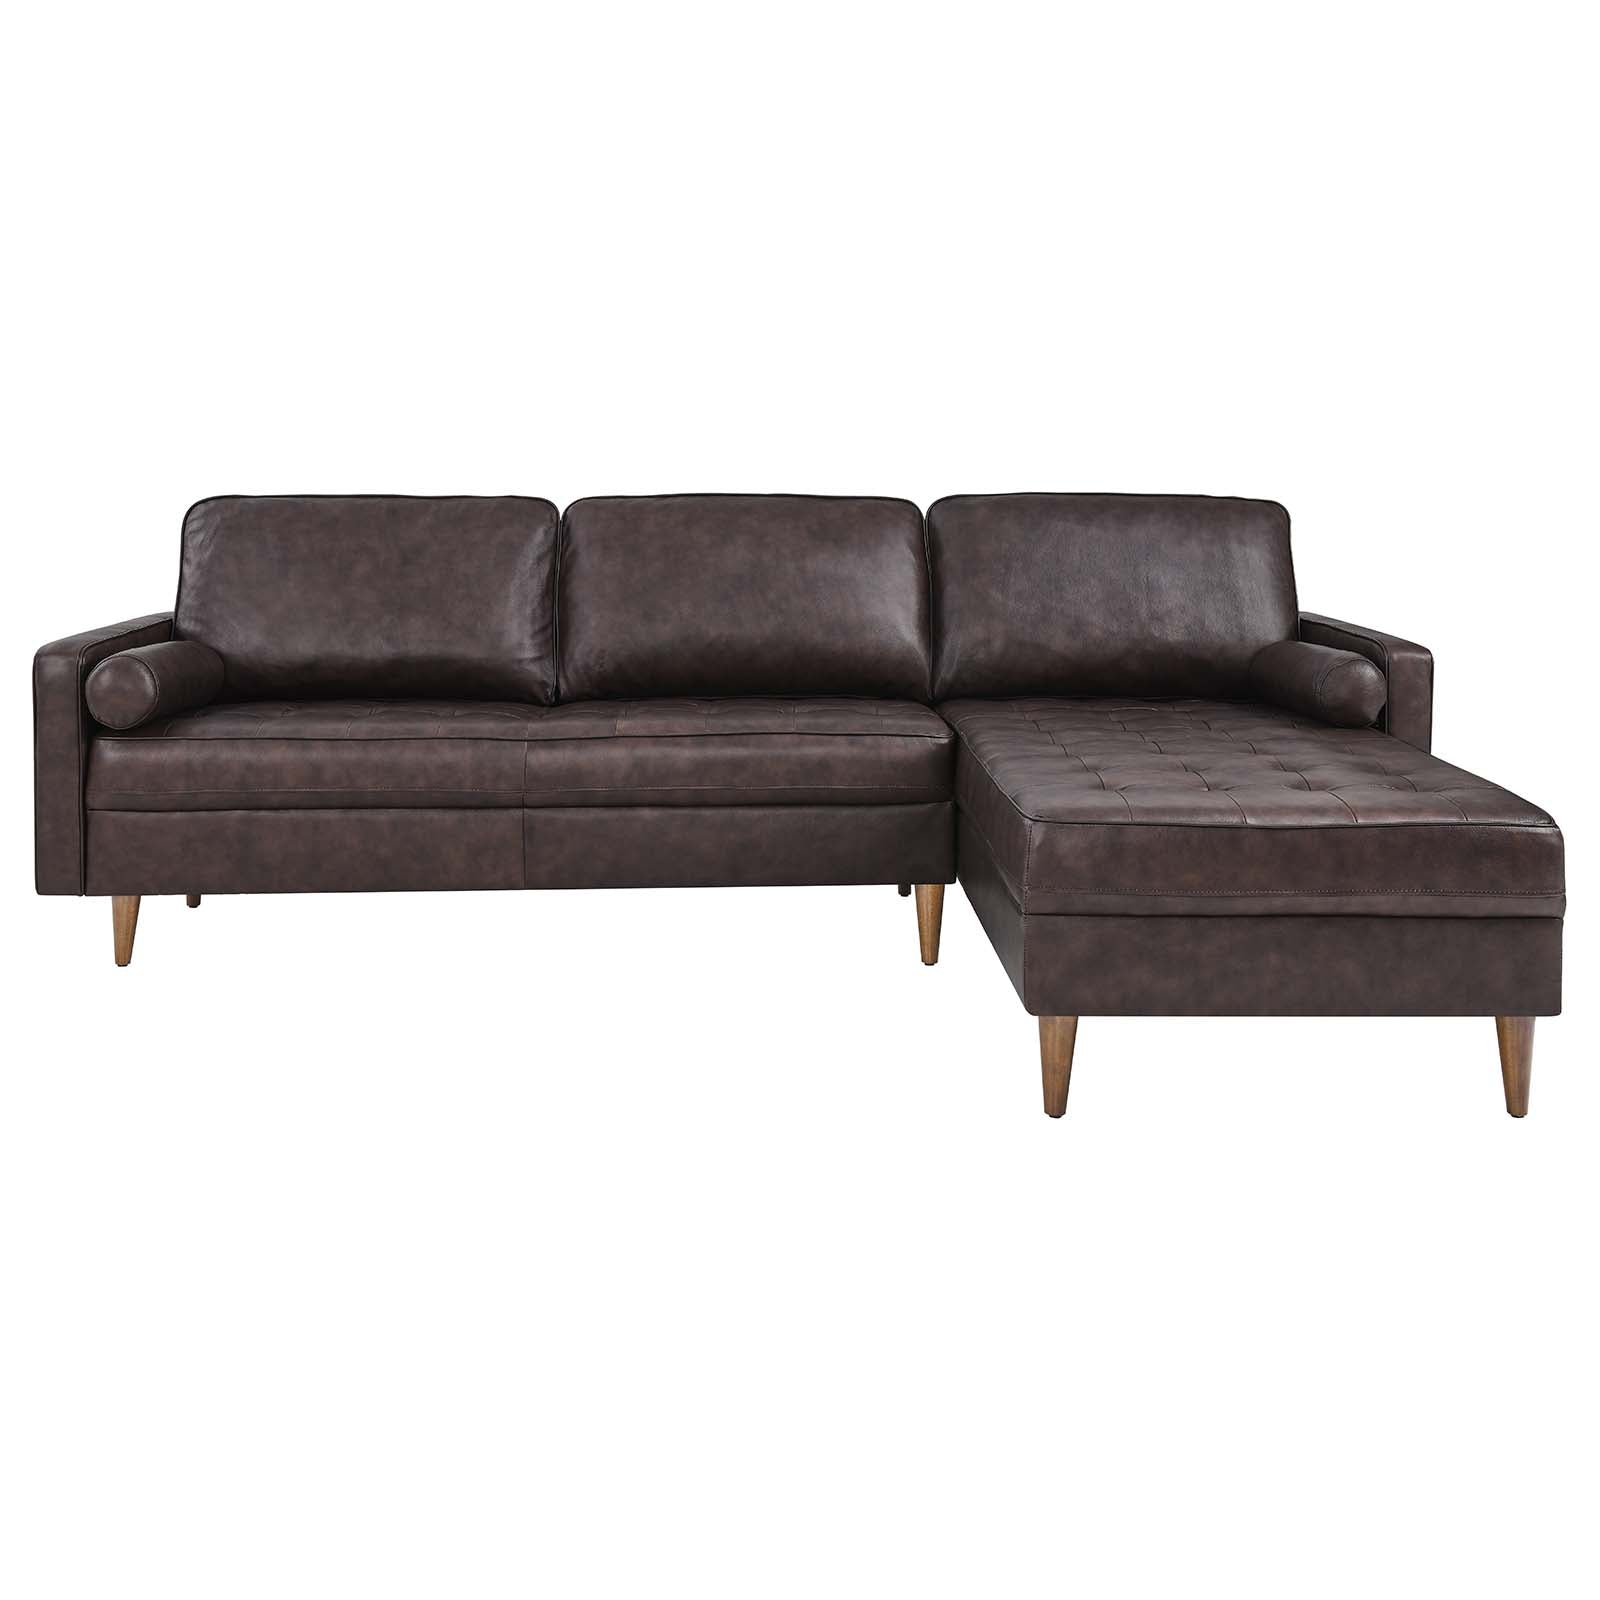 Modway Sectional Sofas - Valour 98" Leather Sectional Sofa Brown